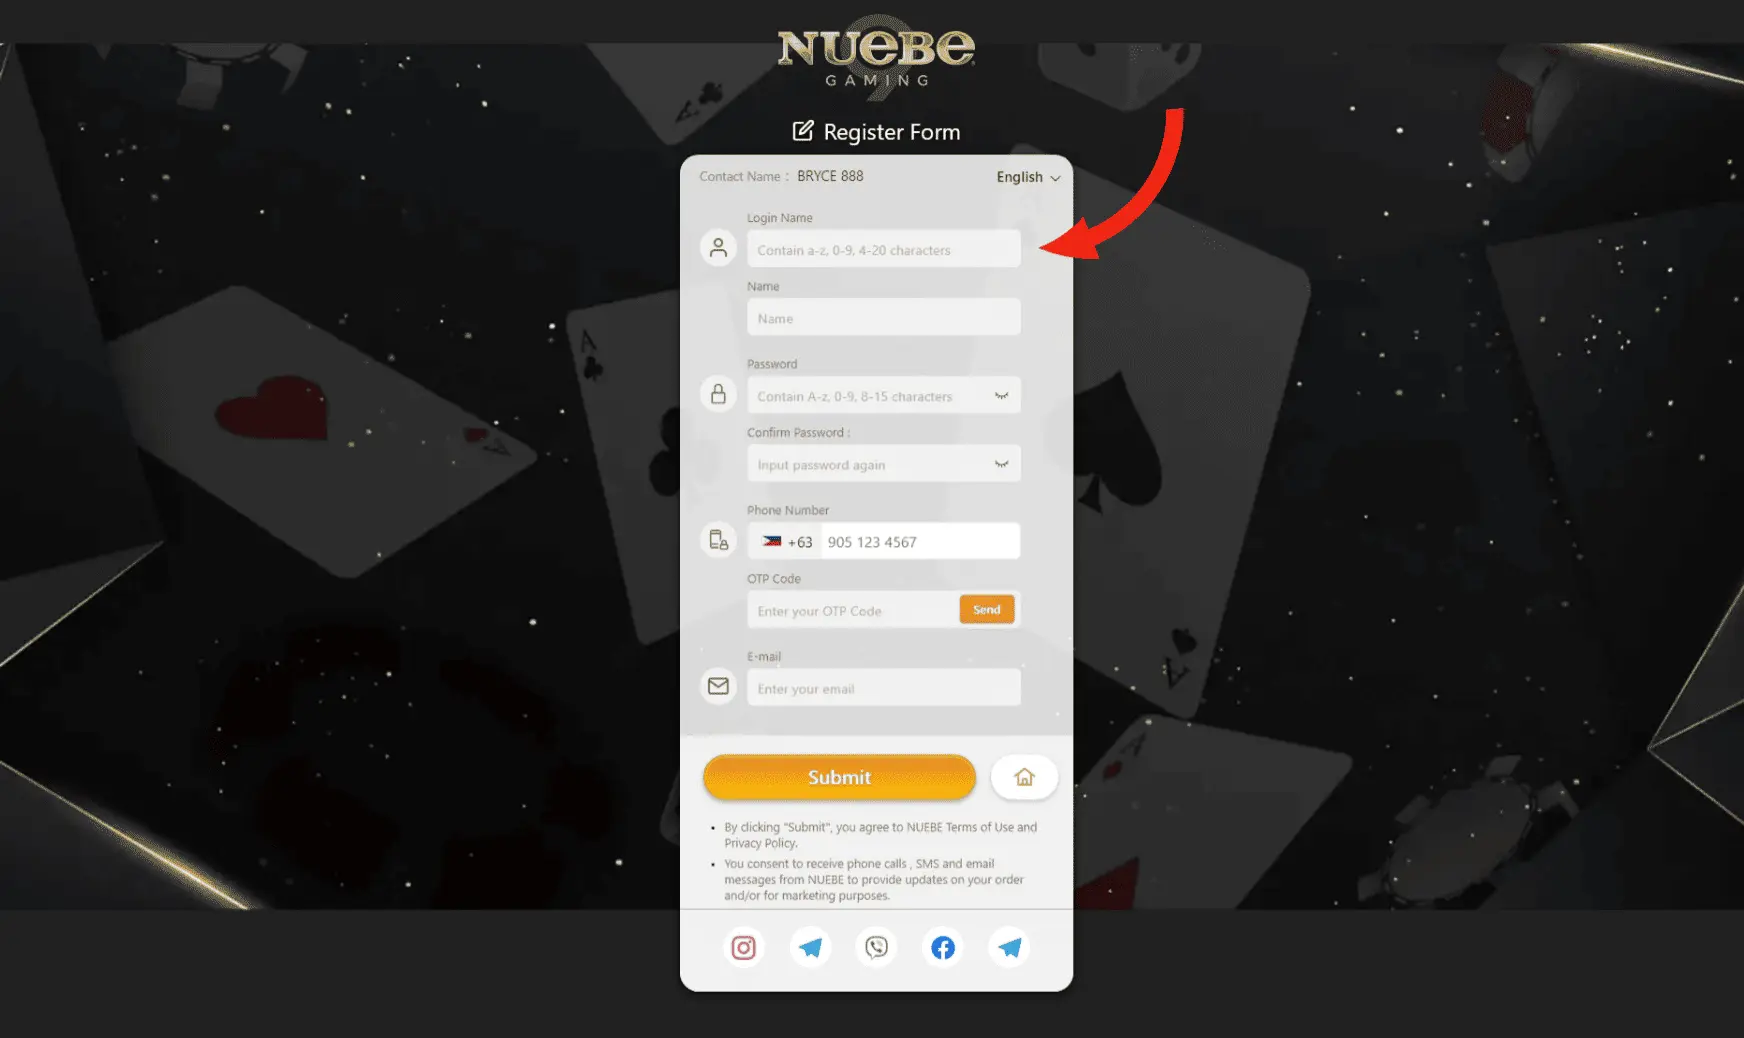 Close-up of the 'Login Name' field on Nuebe Gaming sign up form, set against a celestial backdrop with casino motifs.